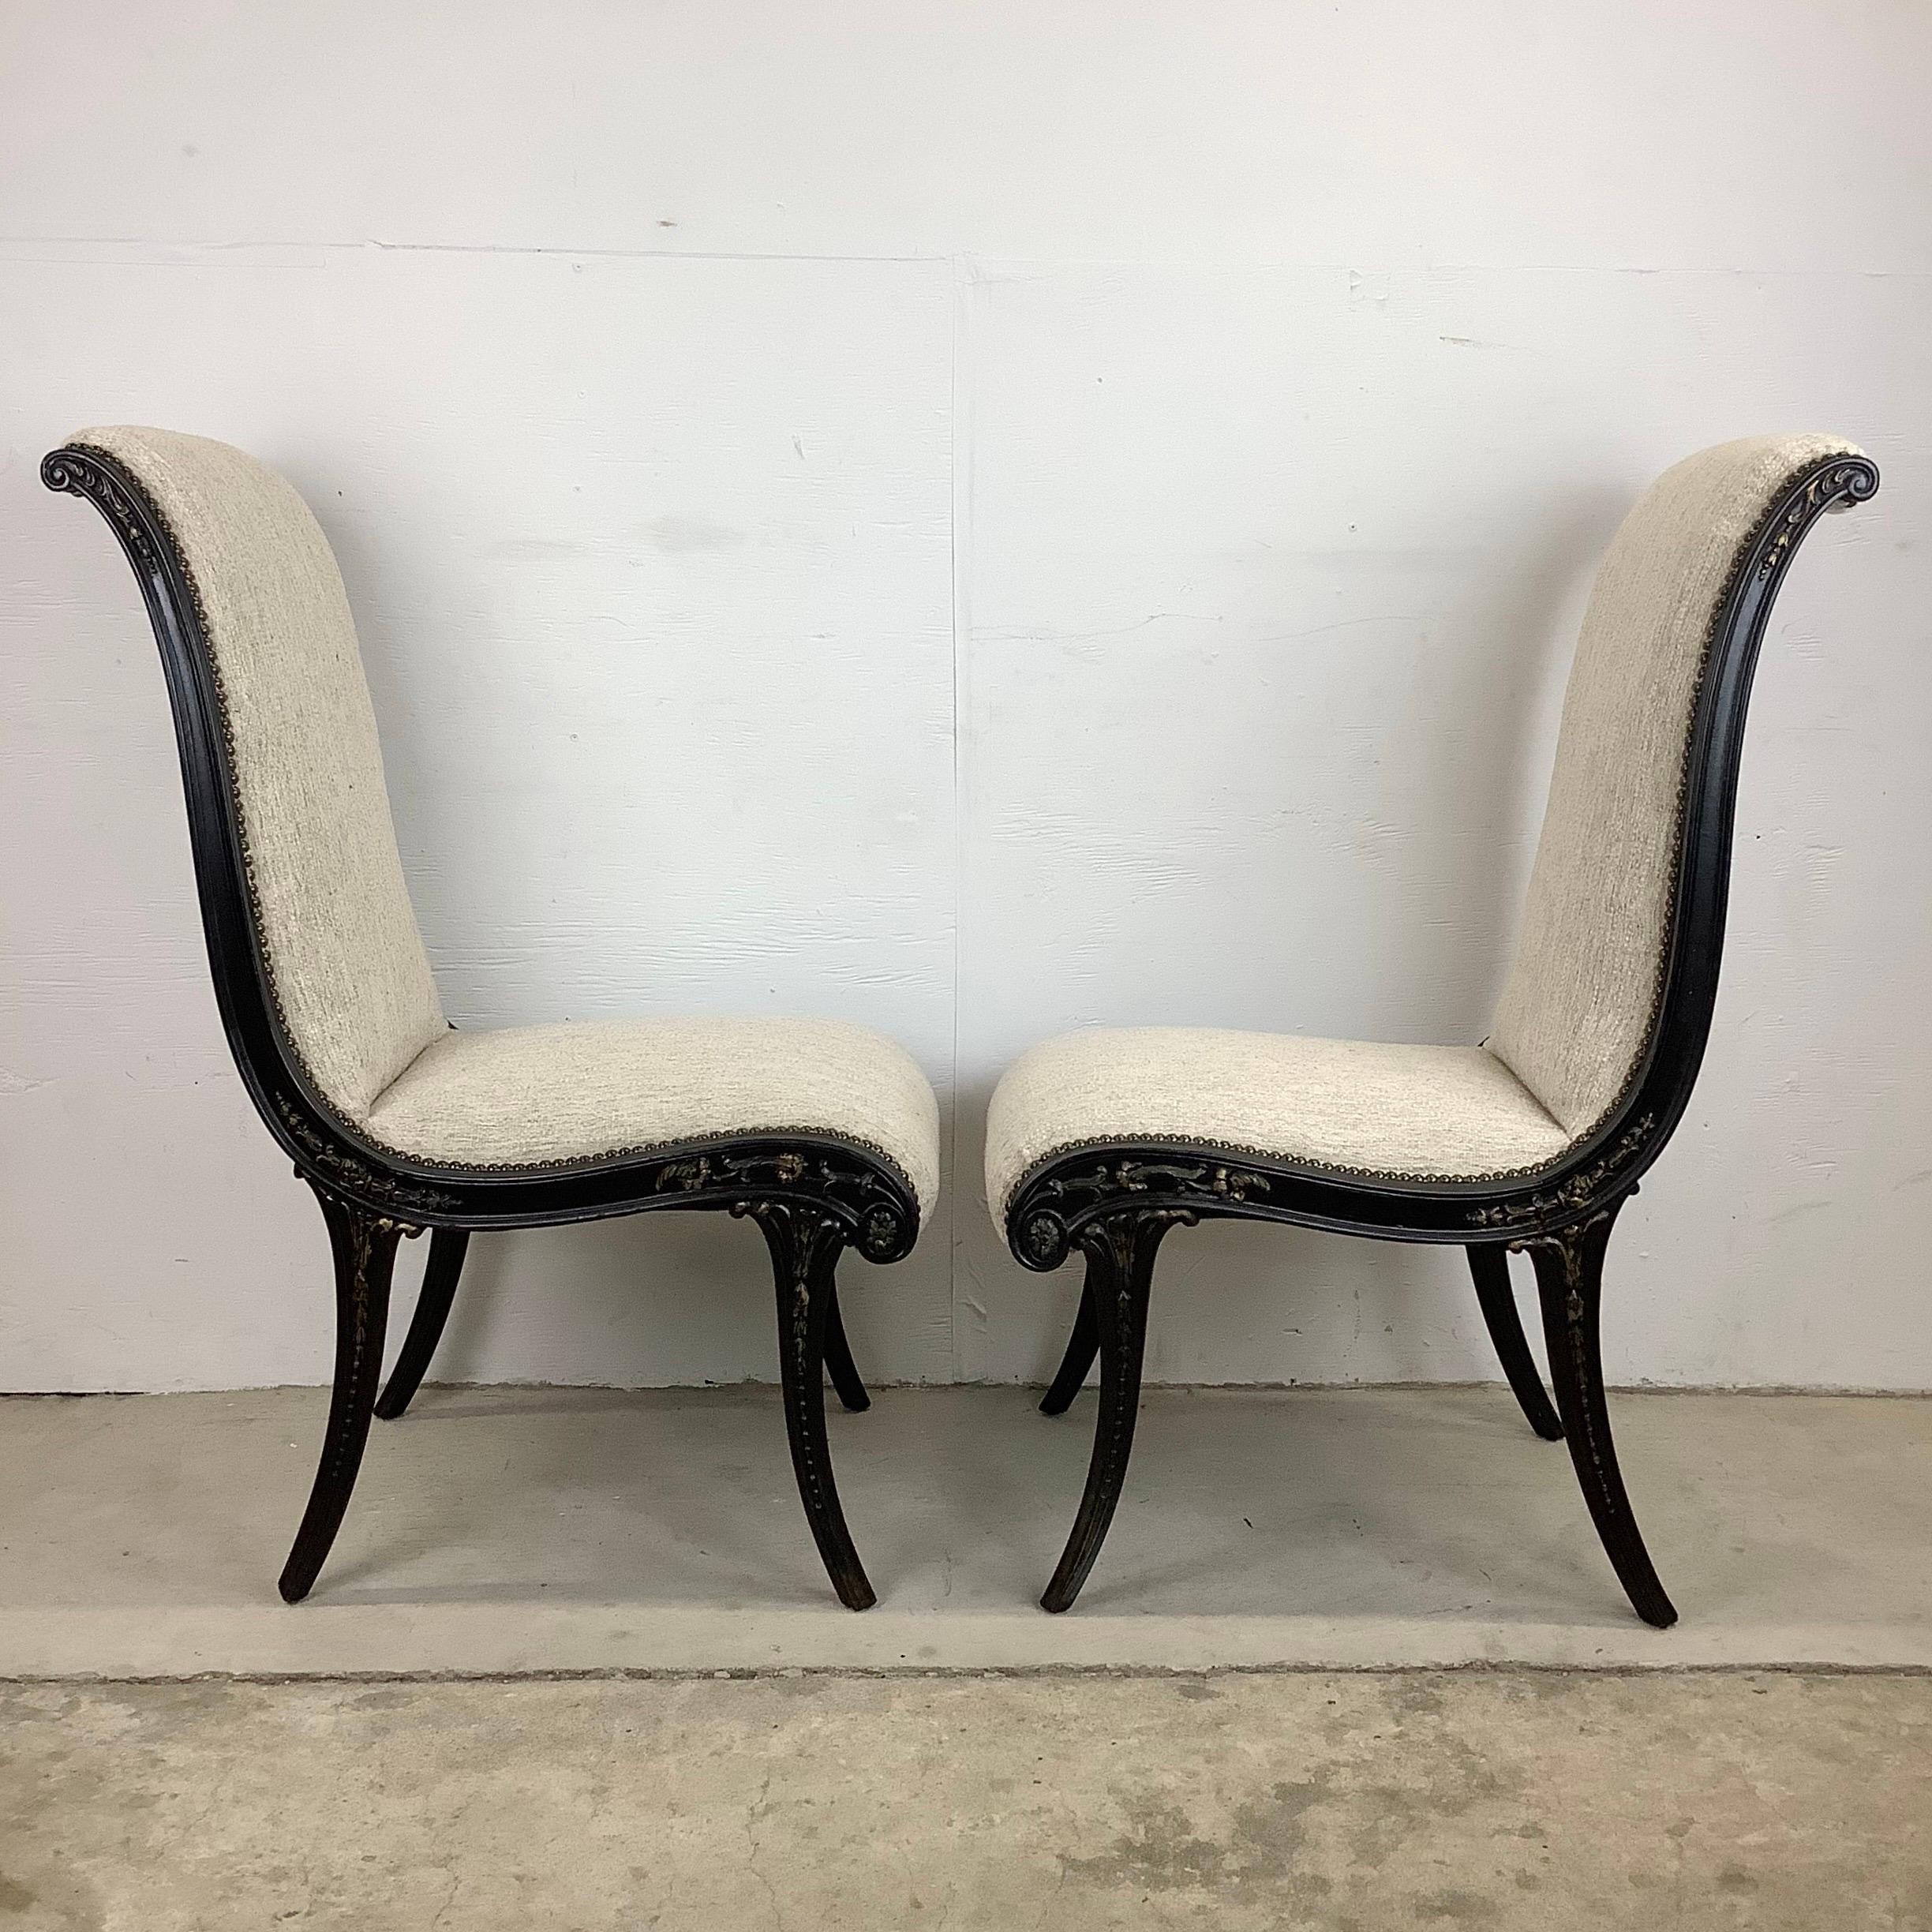 Mid-20th Century Pair Vintage Regency Style Slipper Chairs For Sale